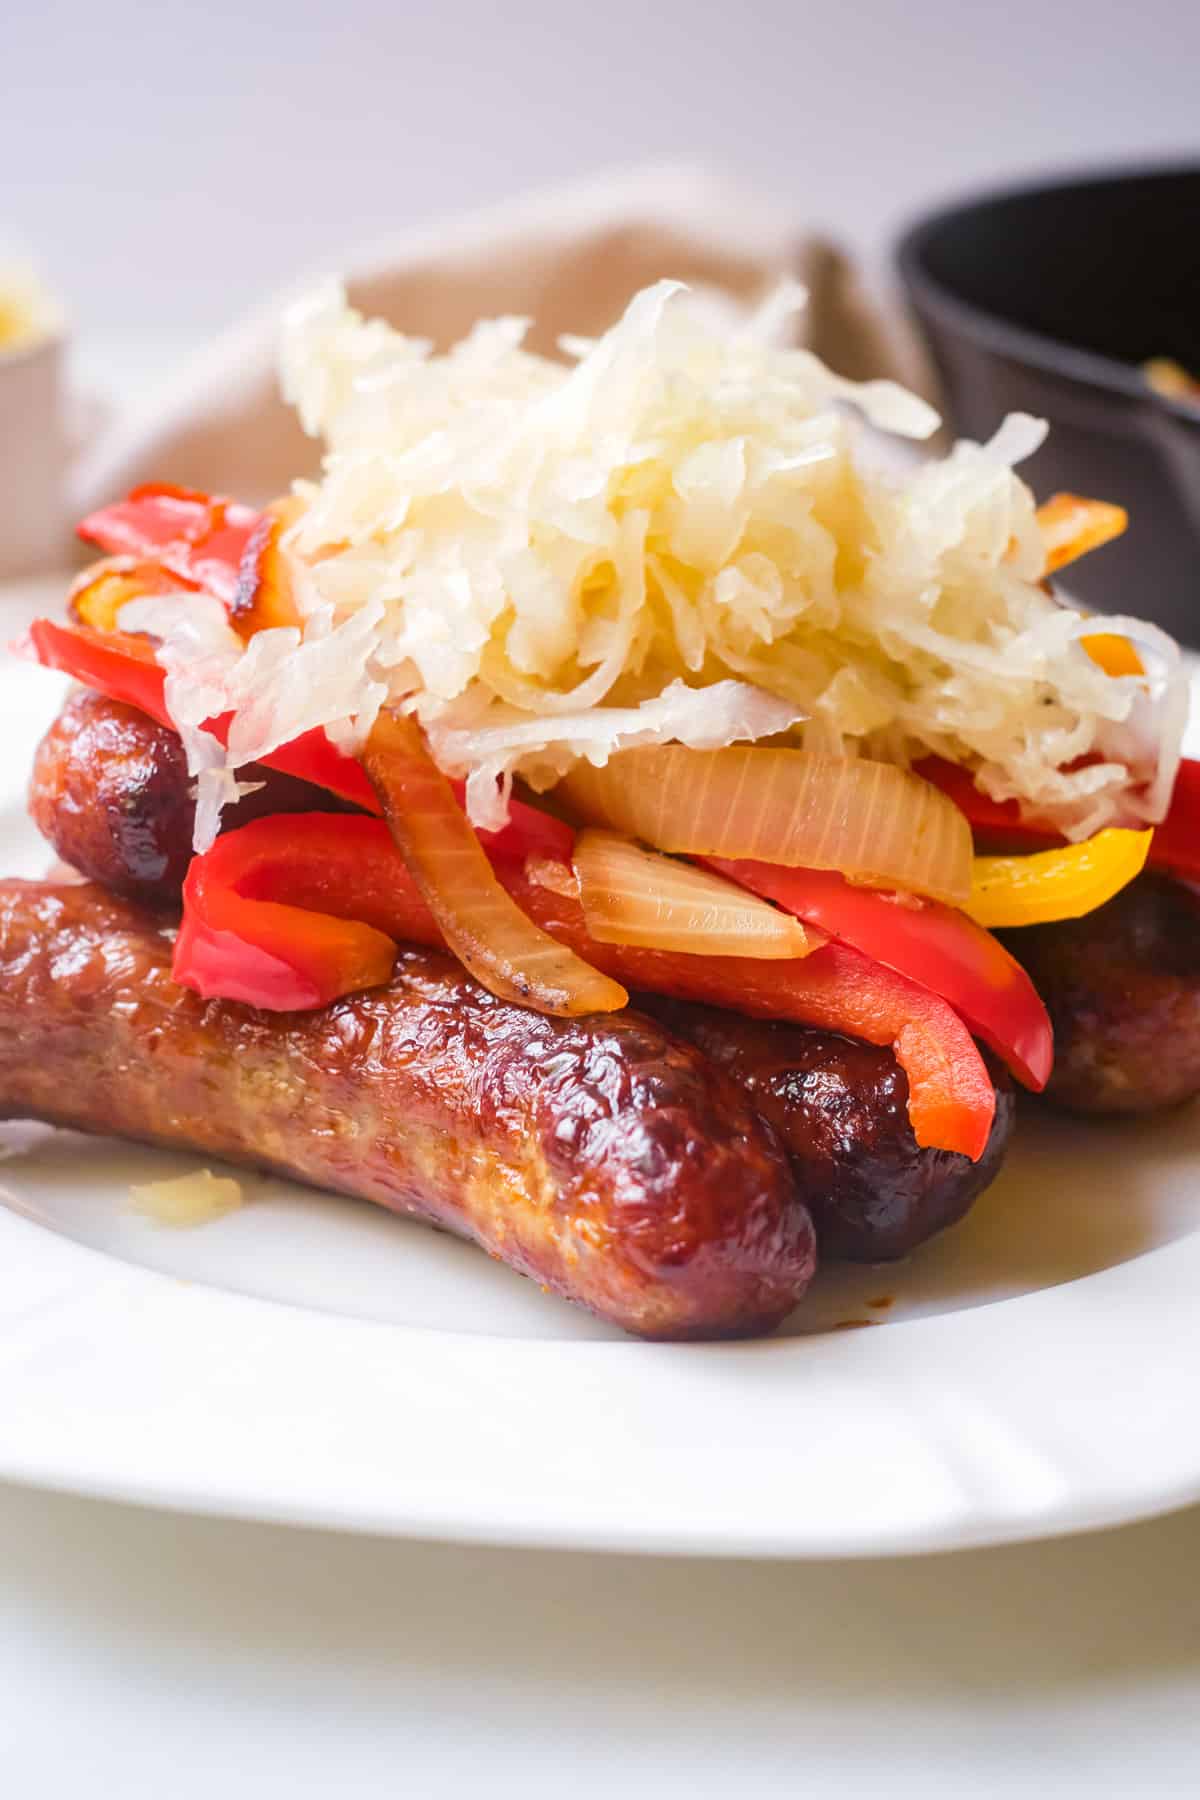 Air-fryed bratwurst on a plate with peppers and sourkraut